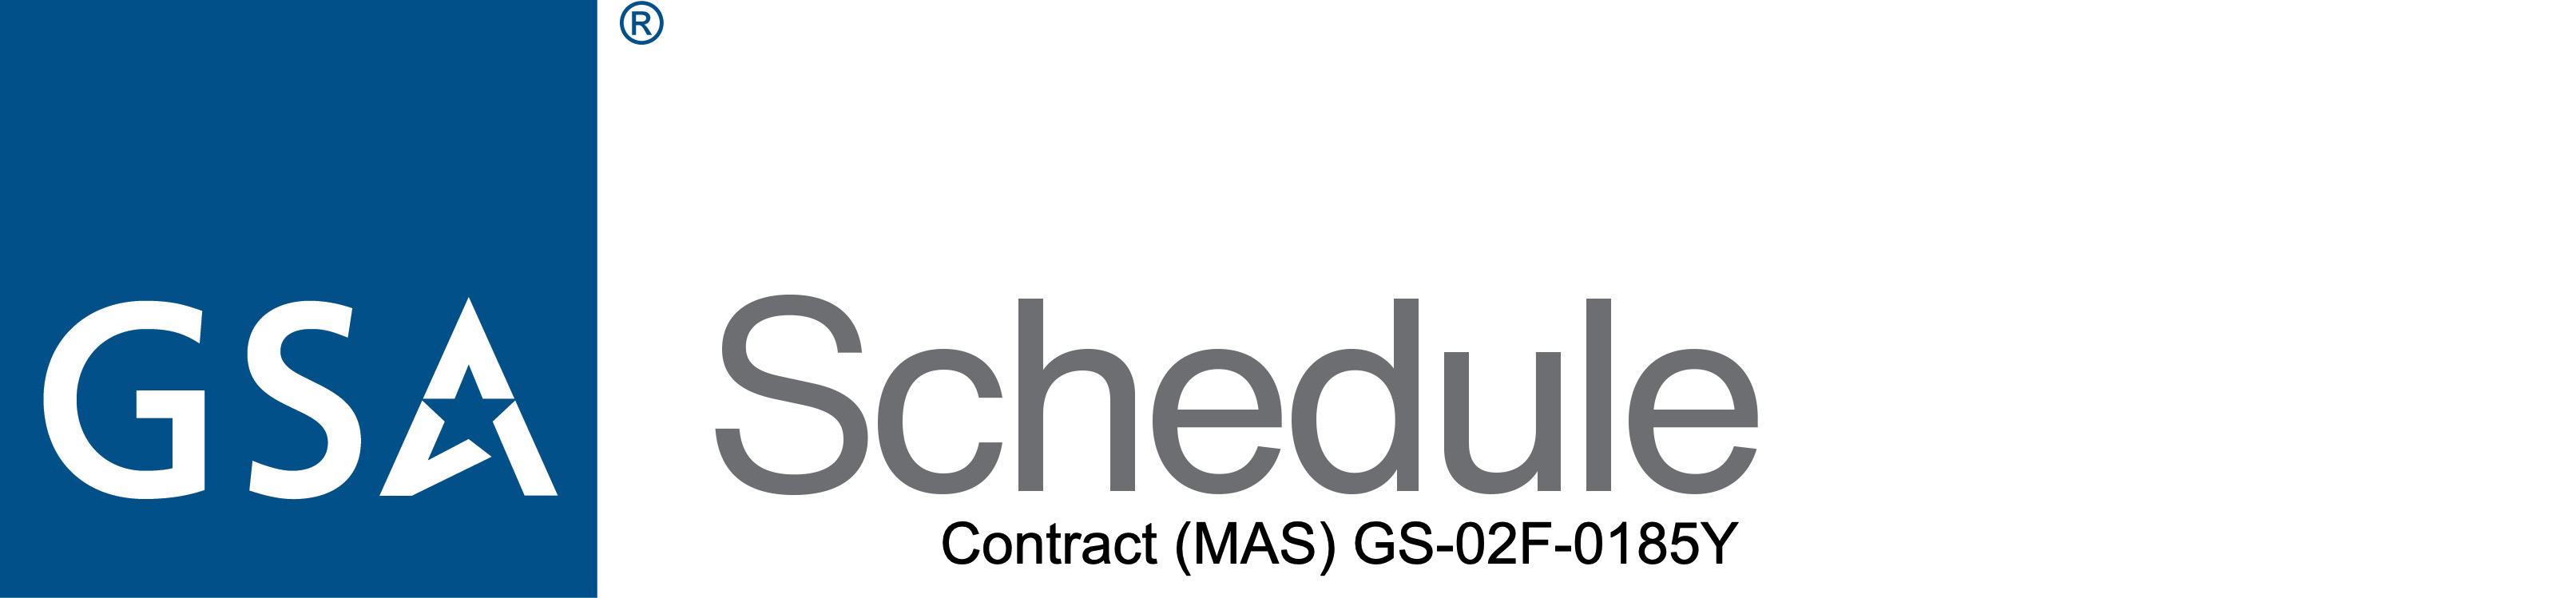 IconLogic is on the GSA schedule!